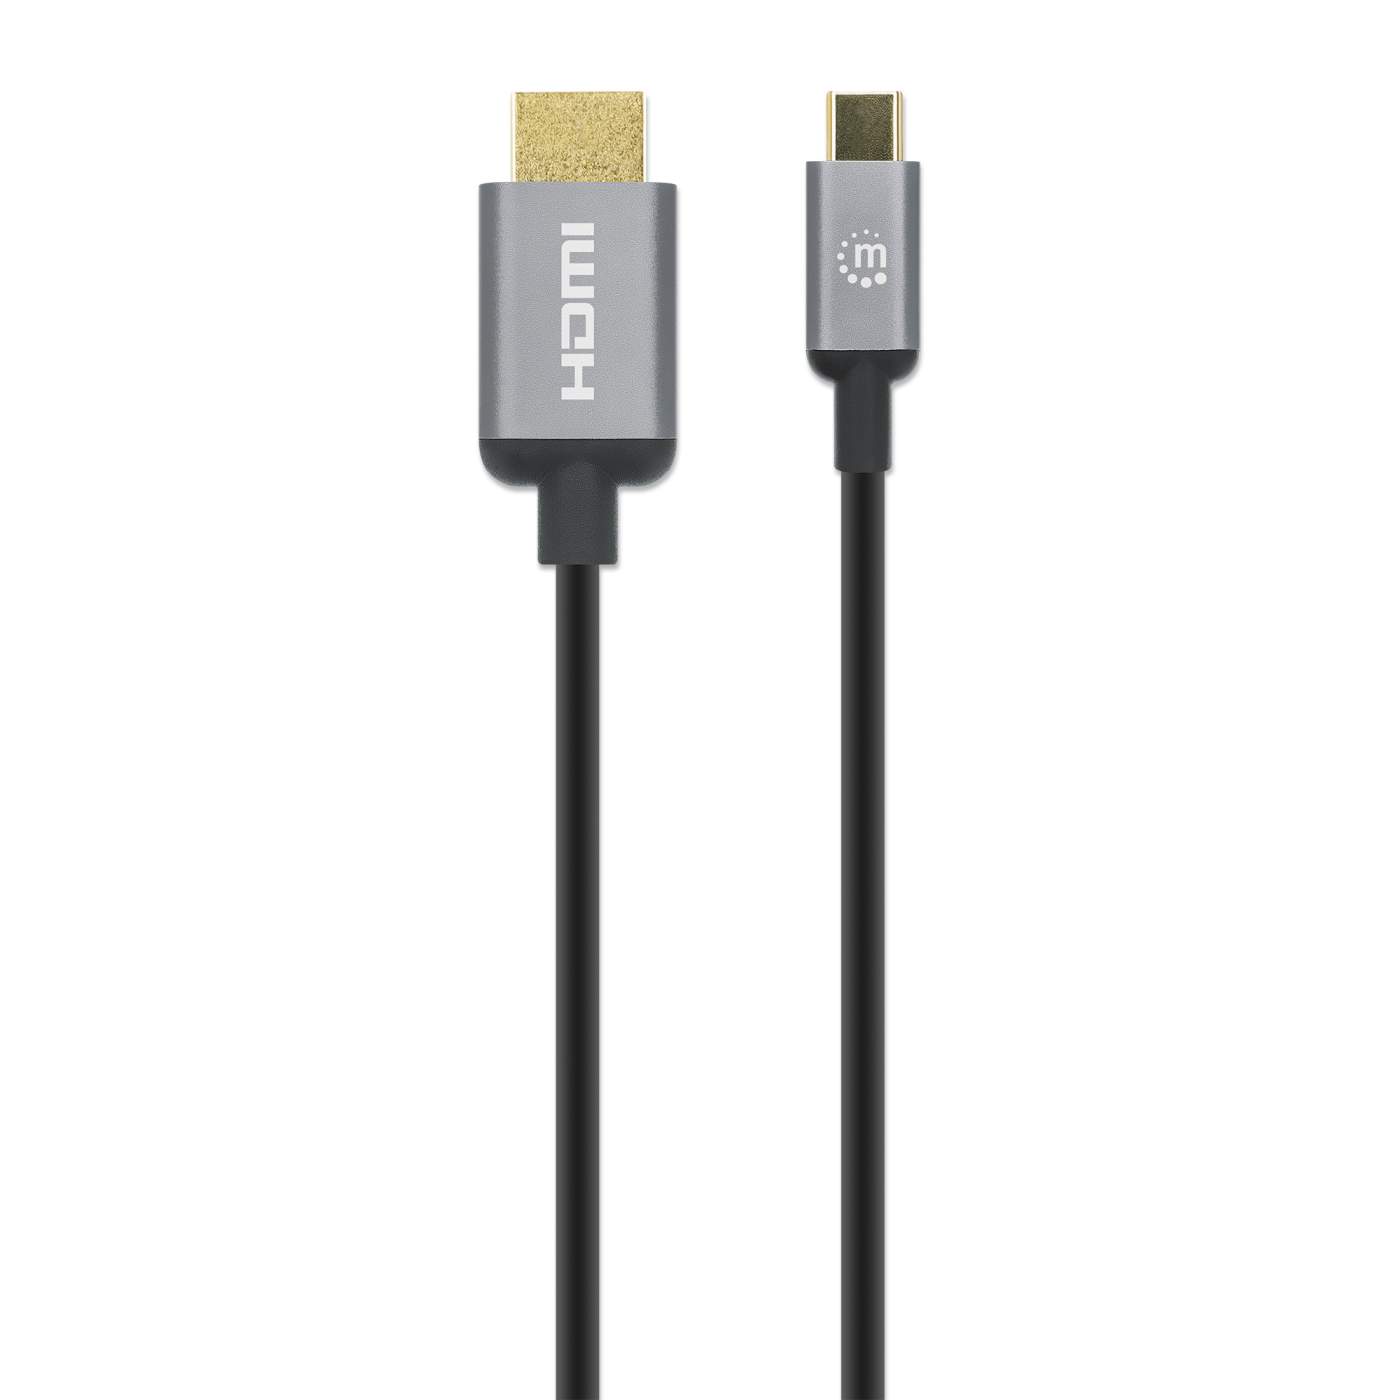 USB-C™ to HDMI Cable